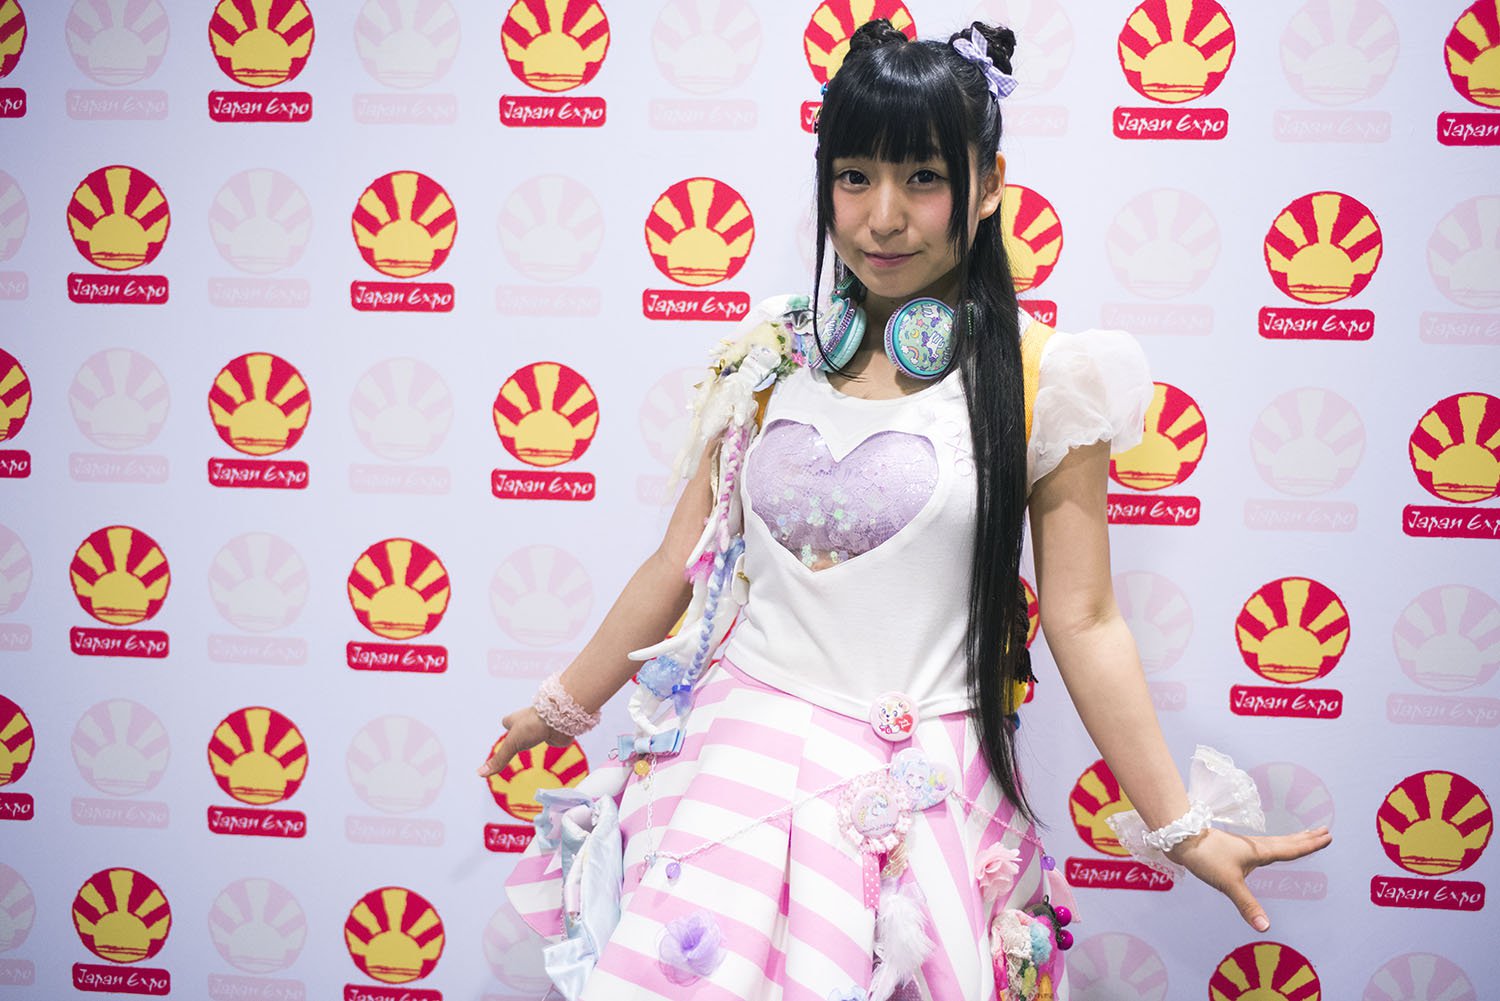 Comment Video & Interview with Rio Hiiragi from Japan Expo 2015 in Paris!